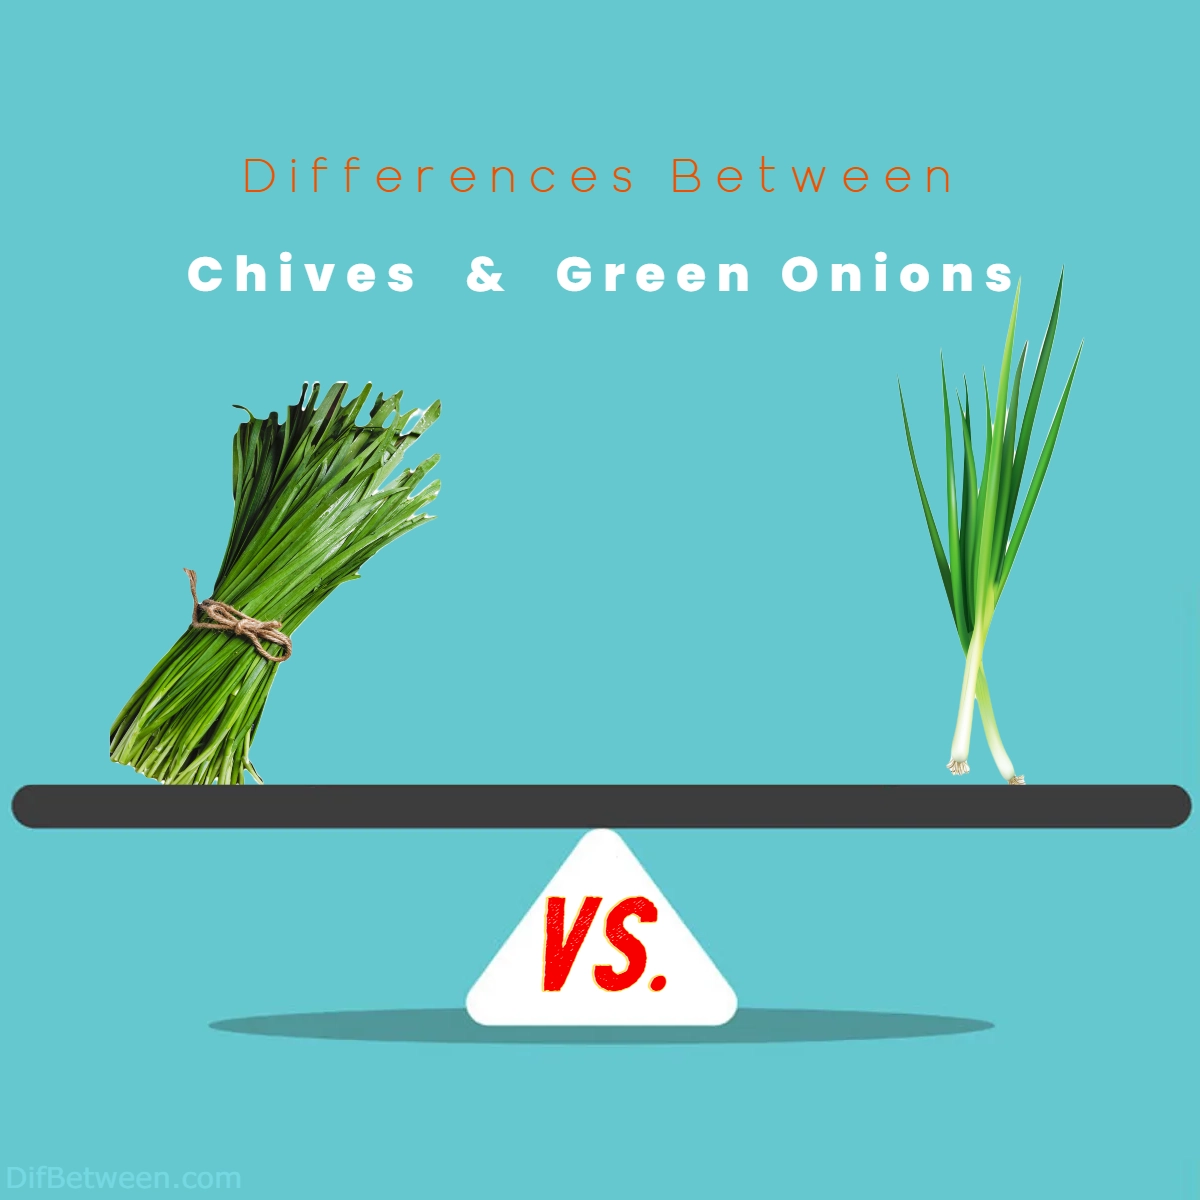 Difference Between Chives and Green Onions